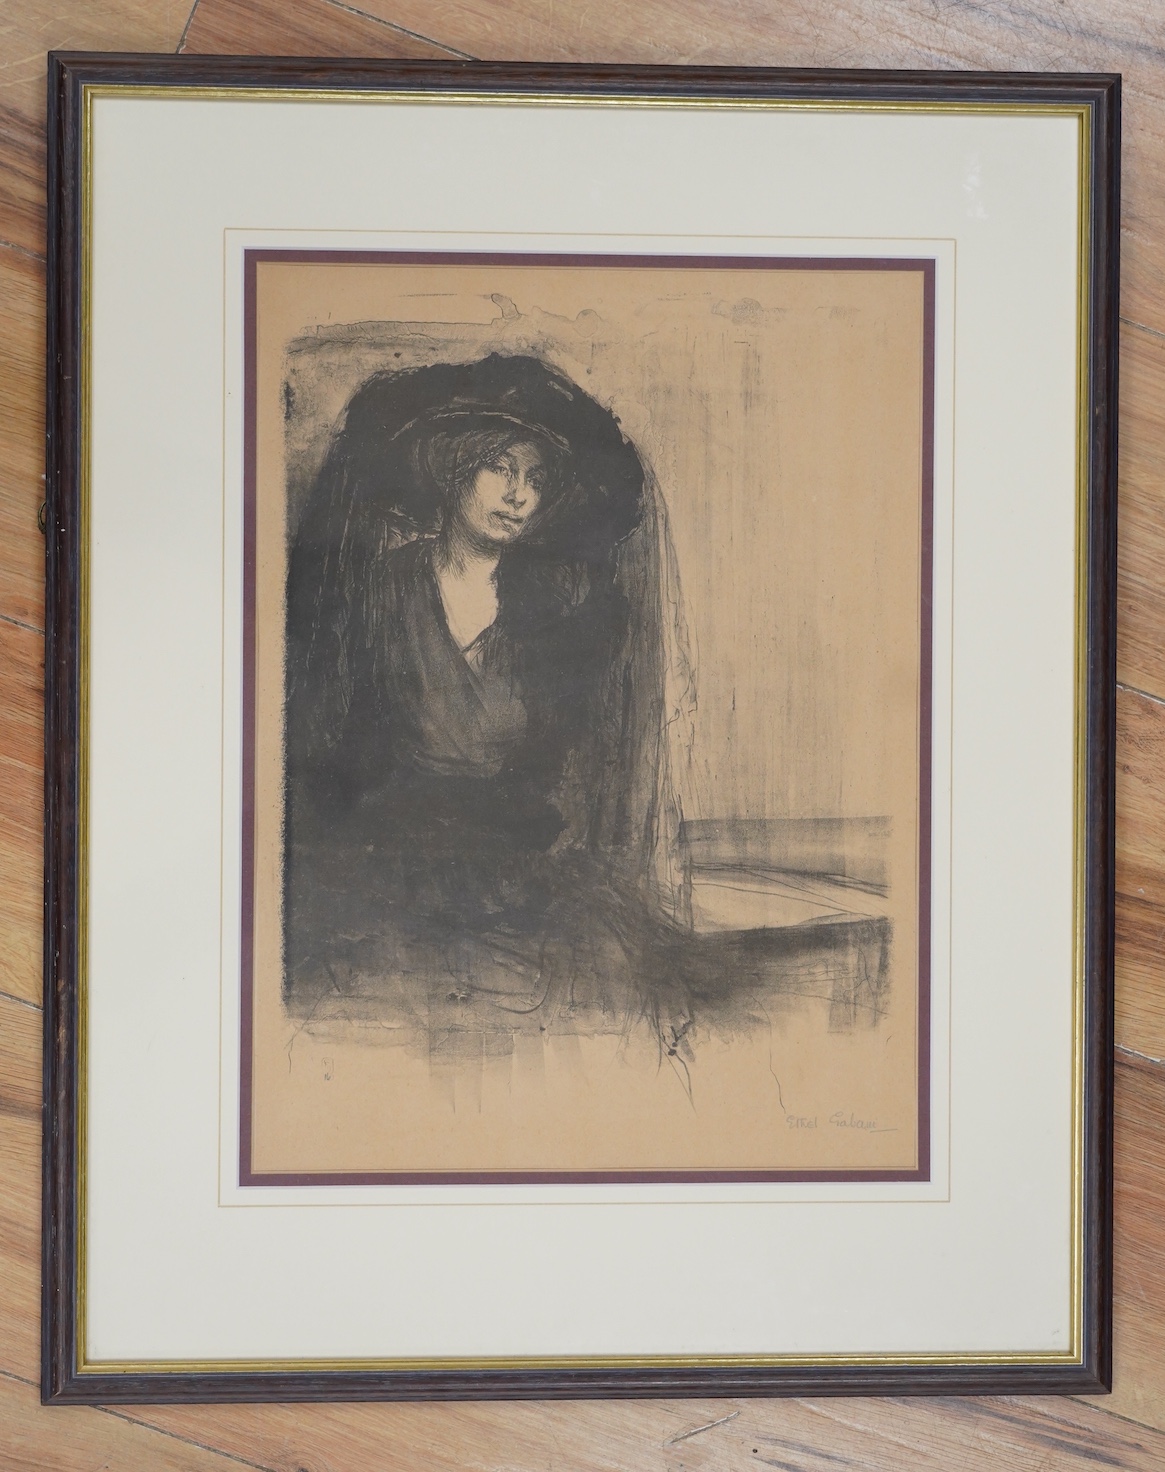 Ethel Gabain (French, 1883-1950), lithograph, ''Deuil'' (Mourning), signed in pencil, 41 x 30cm. Condition - fair, paper browned